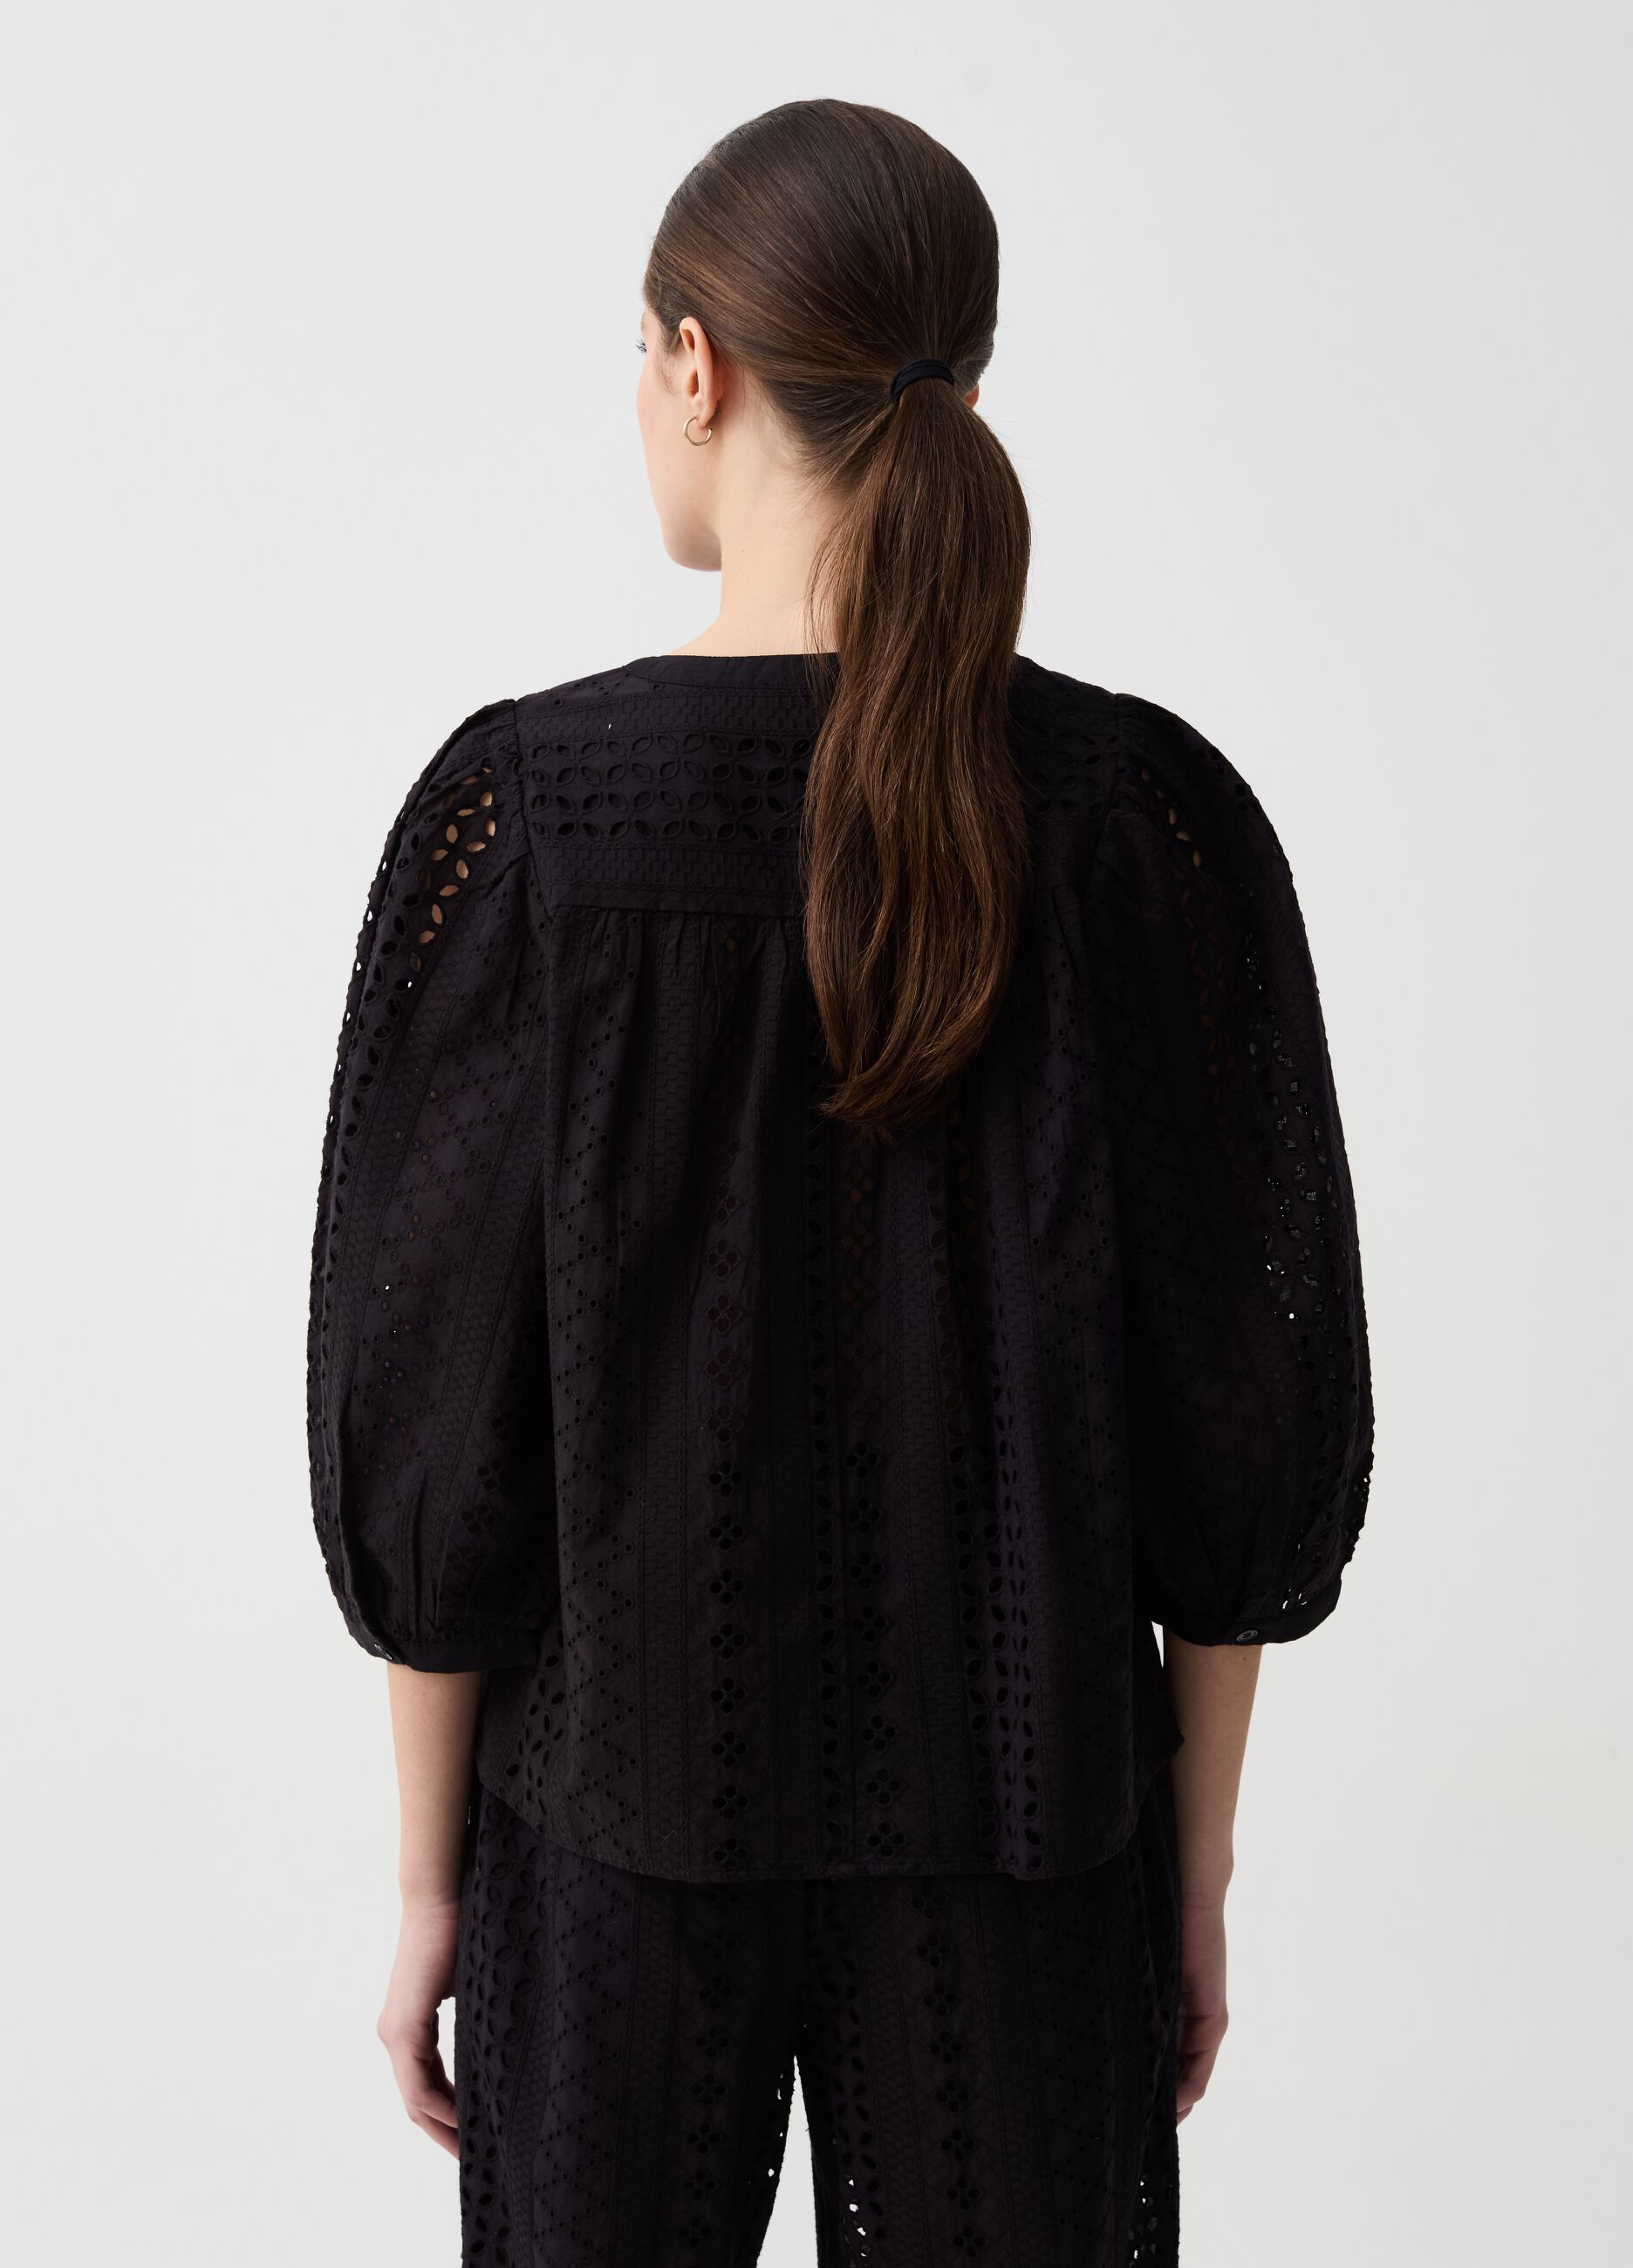 Blouse in broderie anglaise lace with three-quarter sleeves